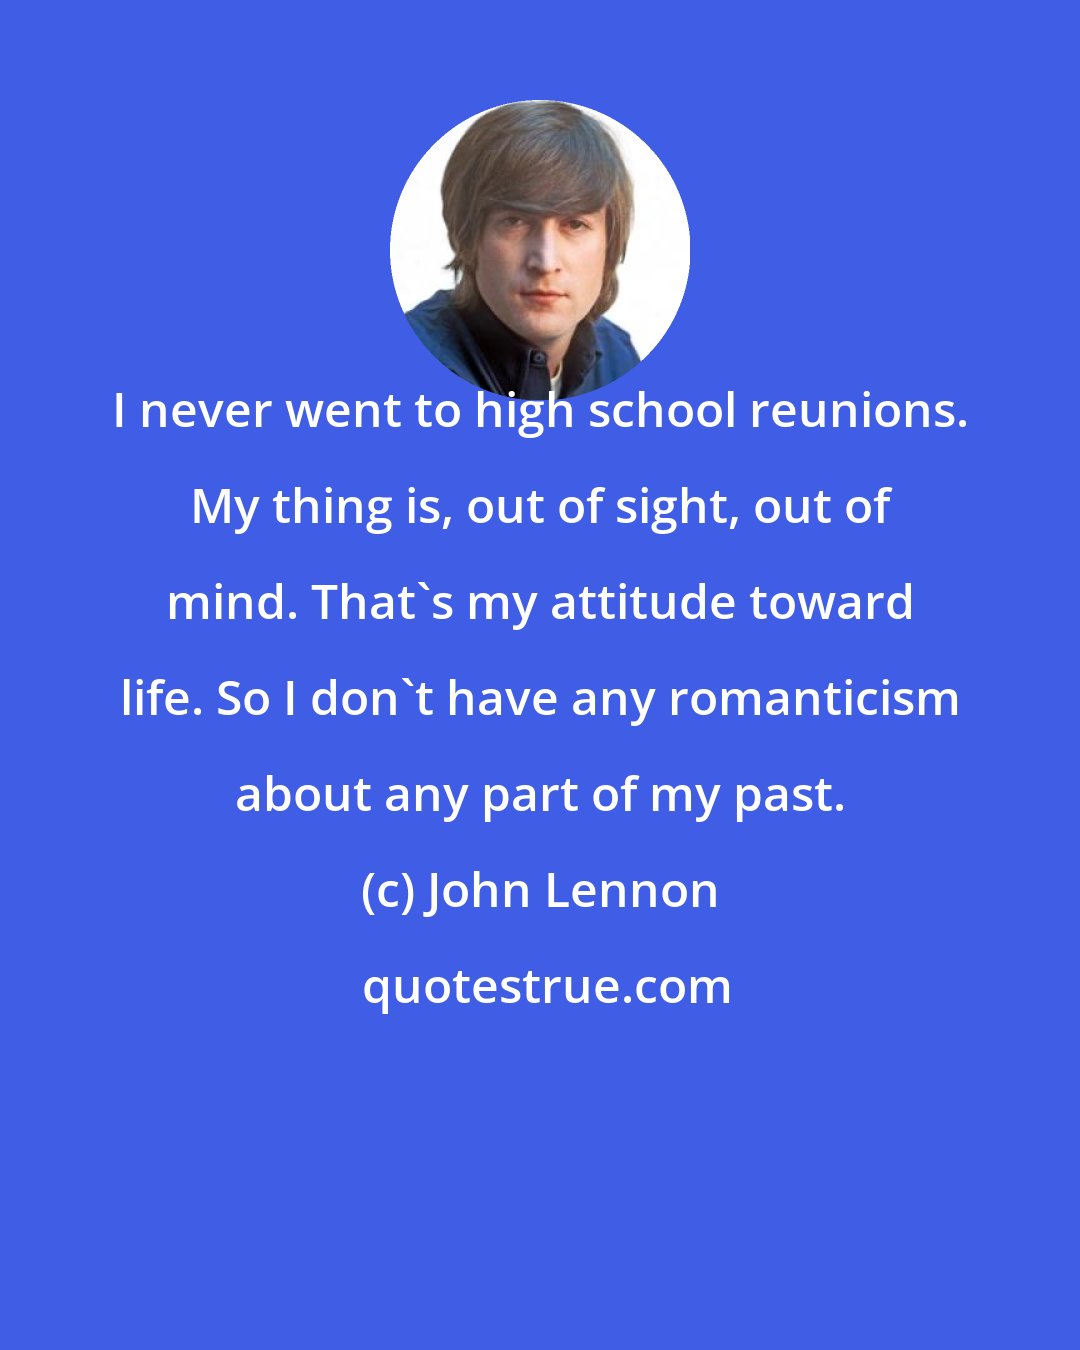 John Lennon: I never went to high school reunions. My thing is, out of sight, out of mind. That's my attitude toward life. So I don't have any romanticism about any part of my past.